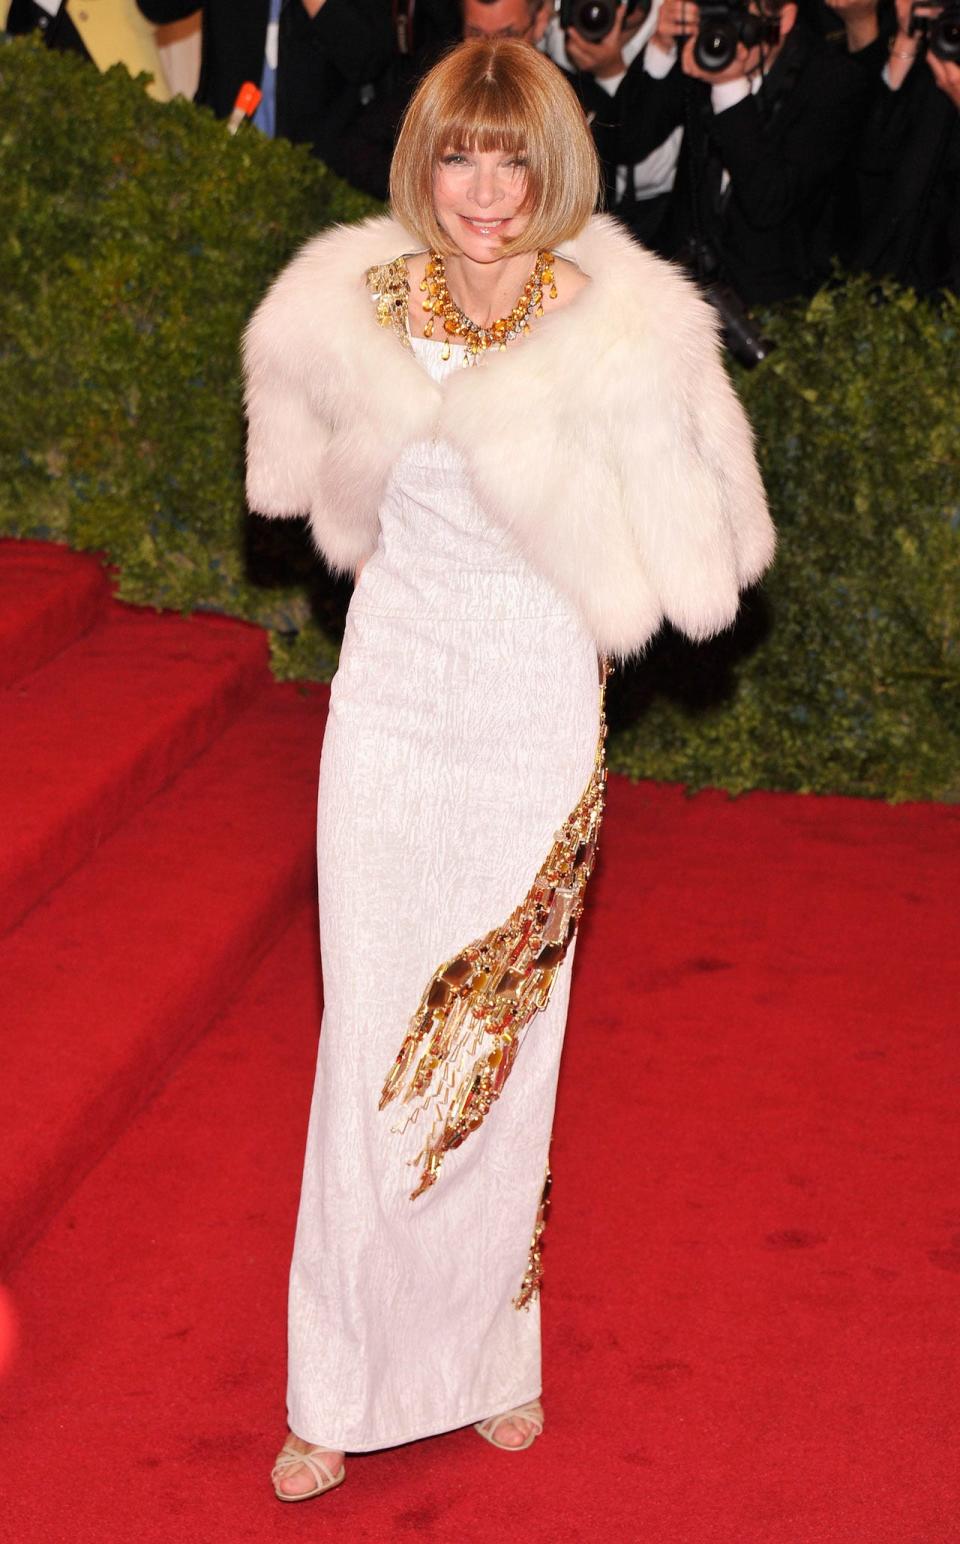 Anna Wintour at the 2012 Met Gala.